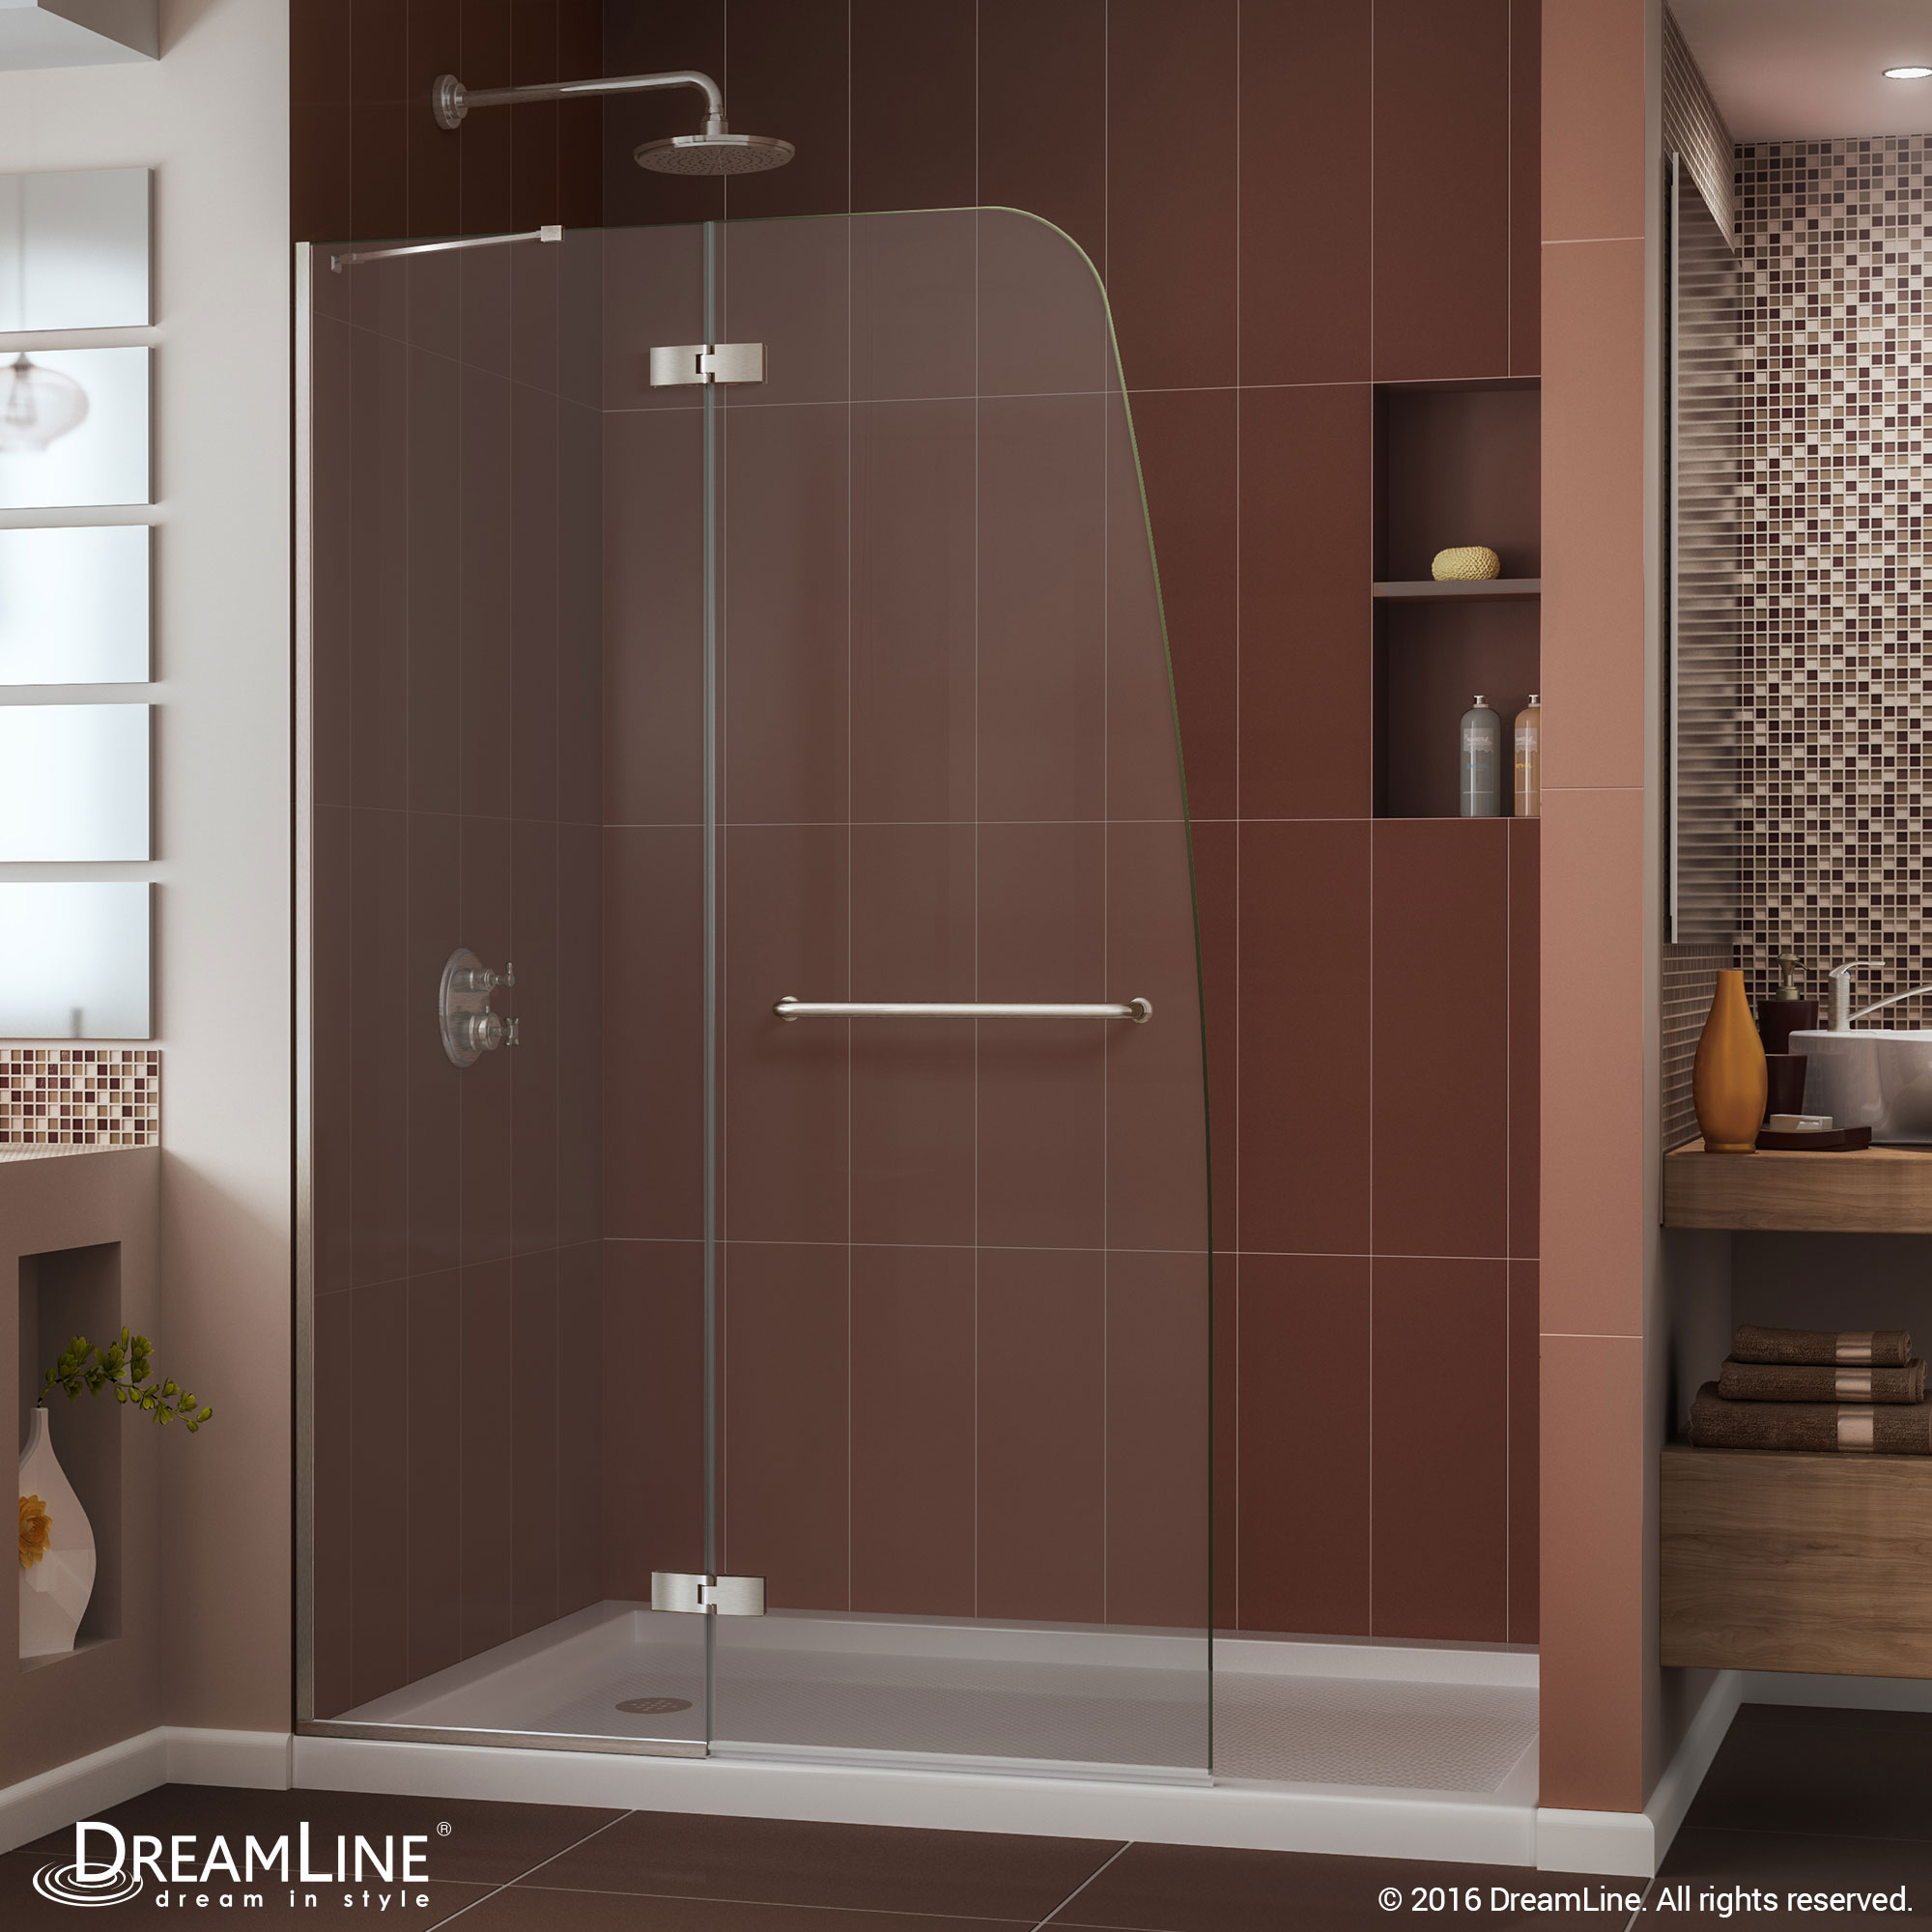 DreamLine Aqua Ultra 36 in. D x 60 in. W x 74 3/4 in. H Frameless Shower Door in Brushed Nickel and Right Drain Biscuit Base Kit